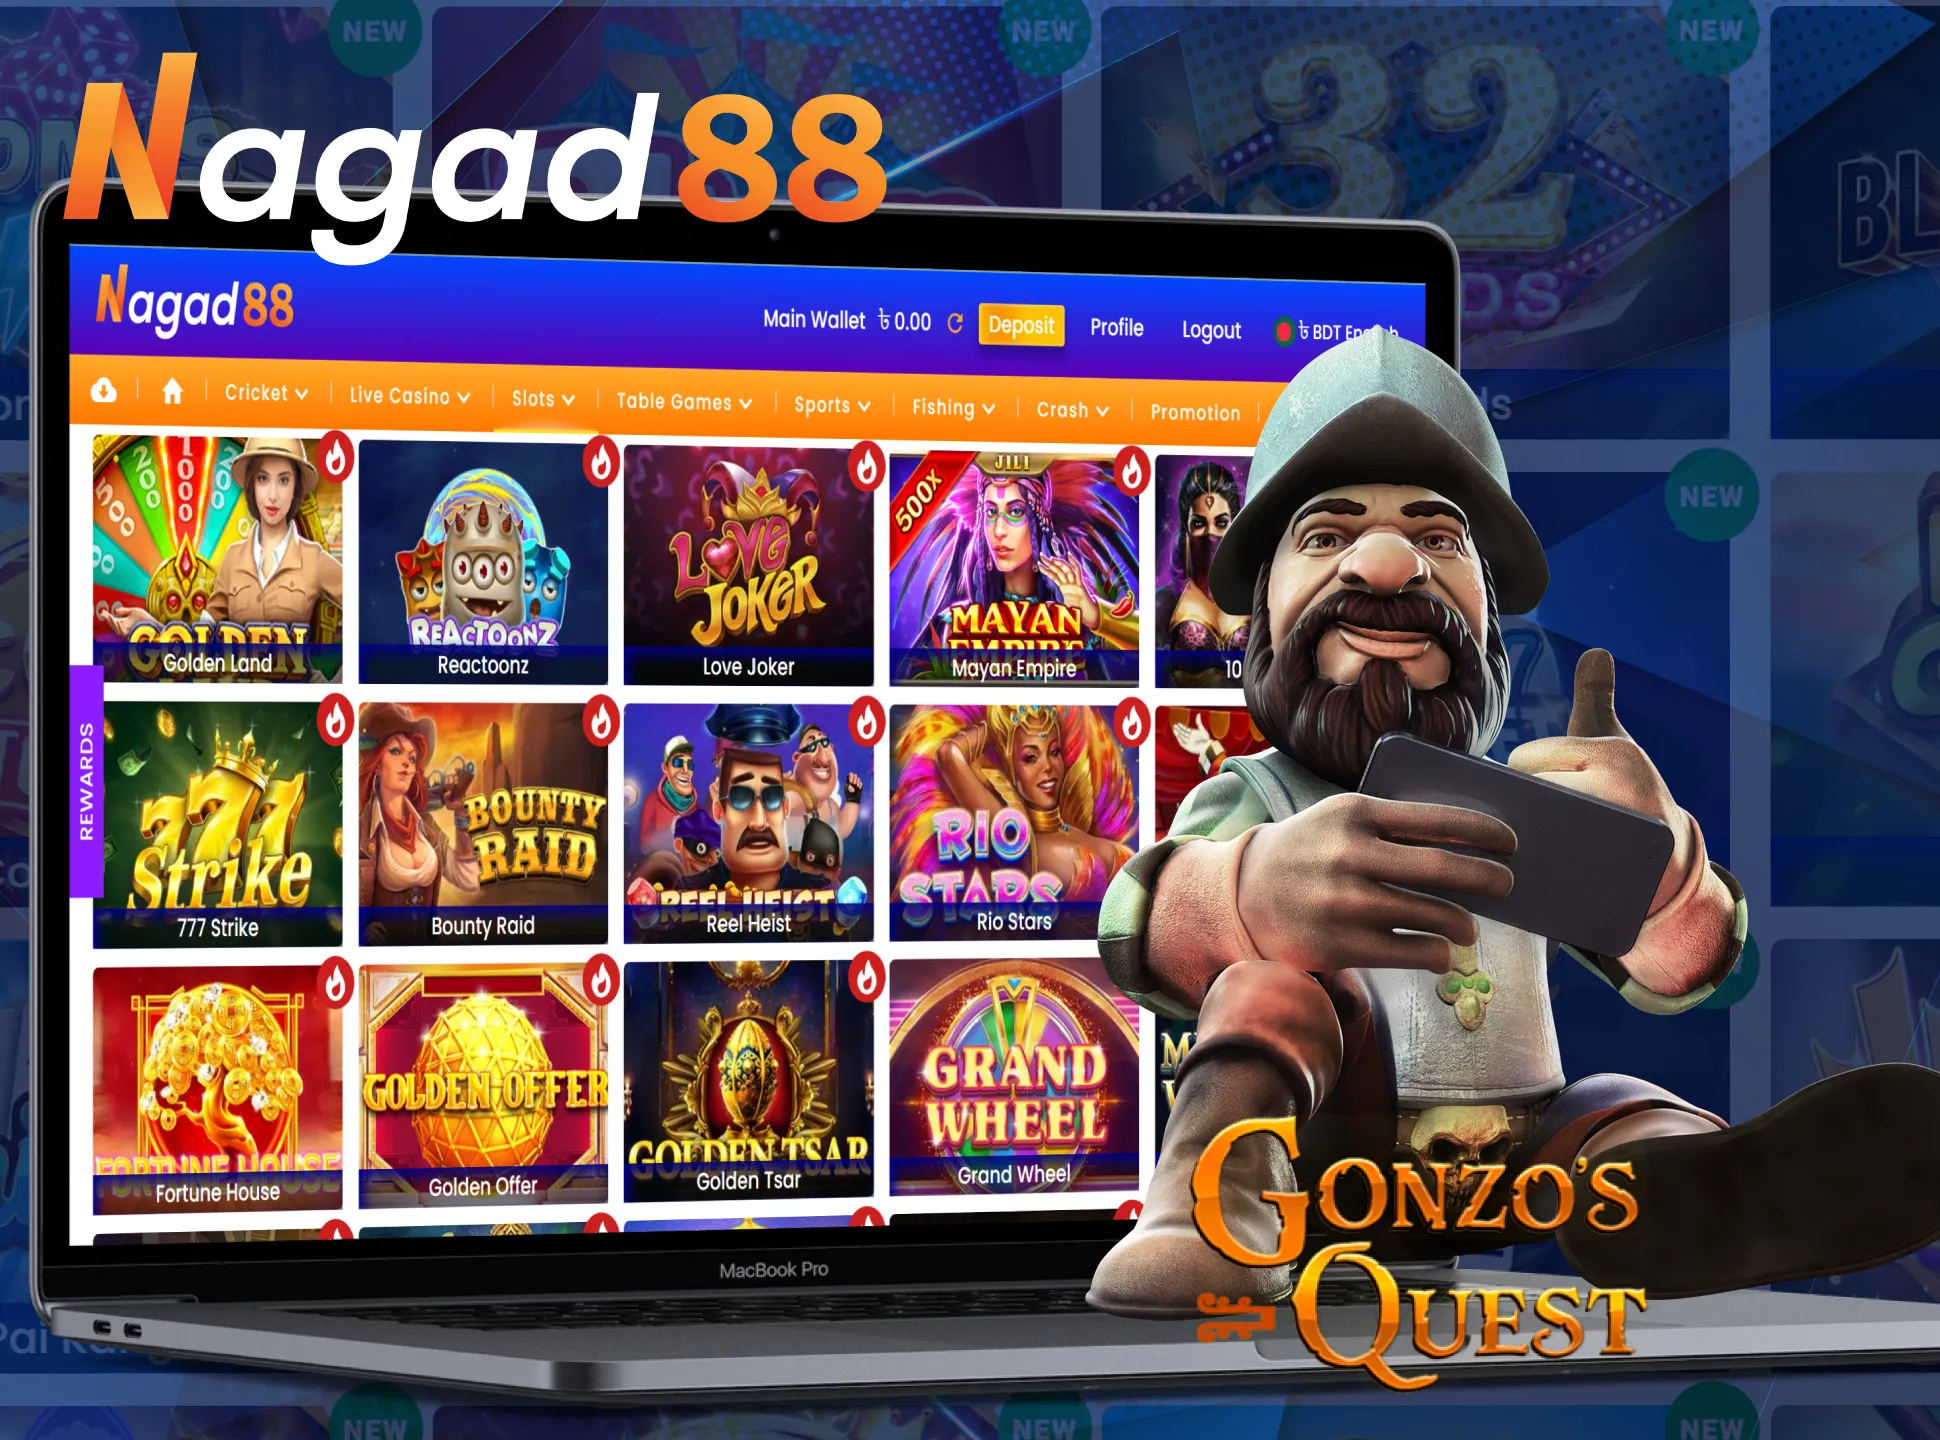 Try playing Gonzos Quest Nagad88.